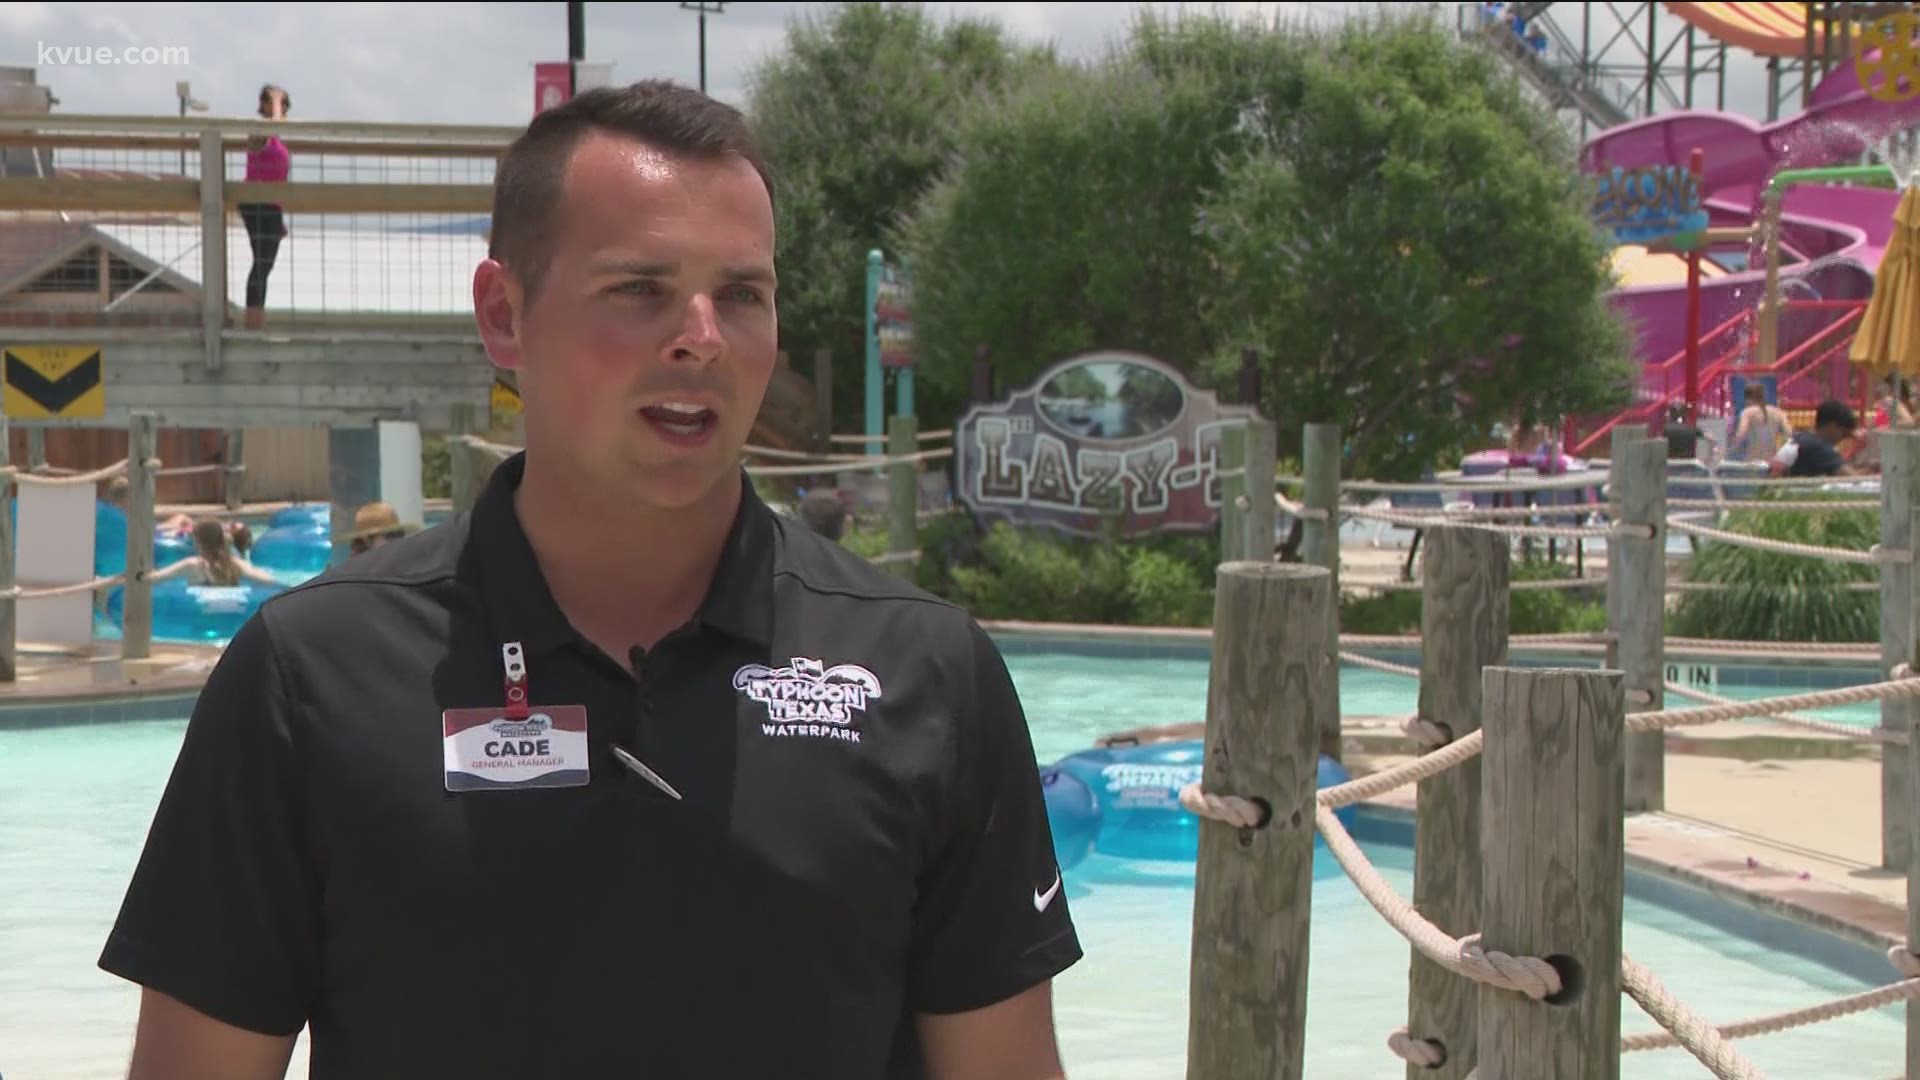 Local pools are preparing for big crowds this Memorial Day weekend. More lifeguards are needed all around Central Texas.